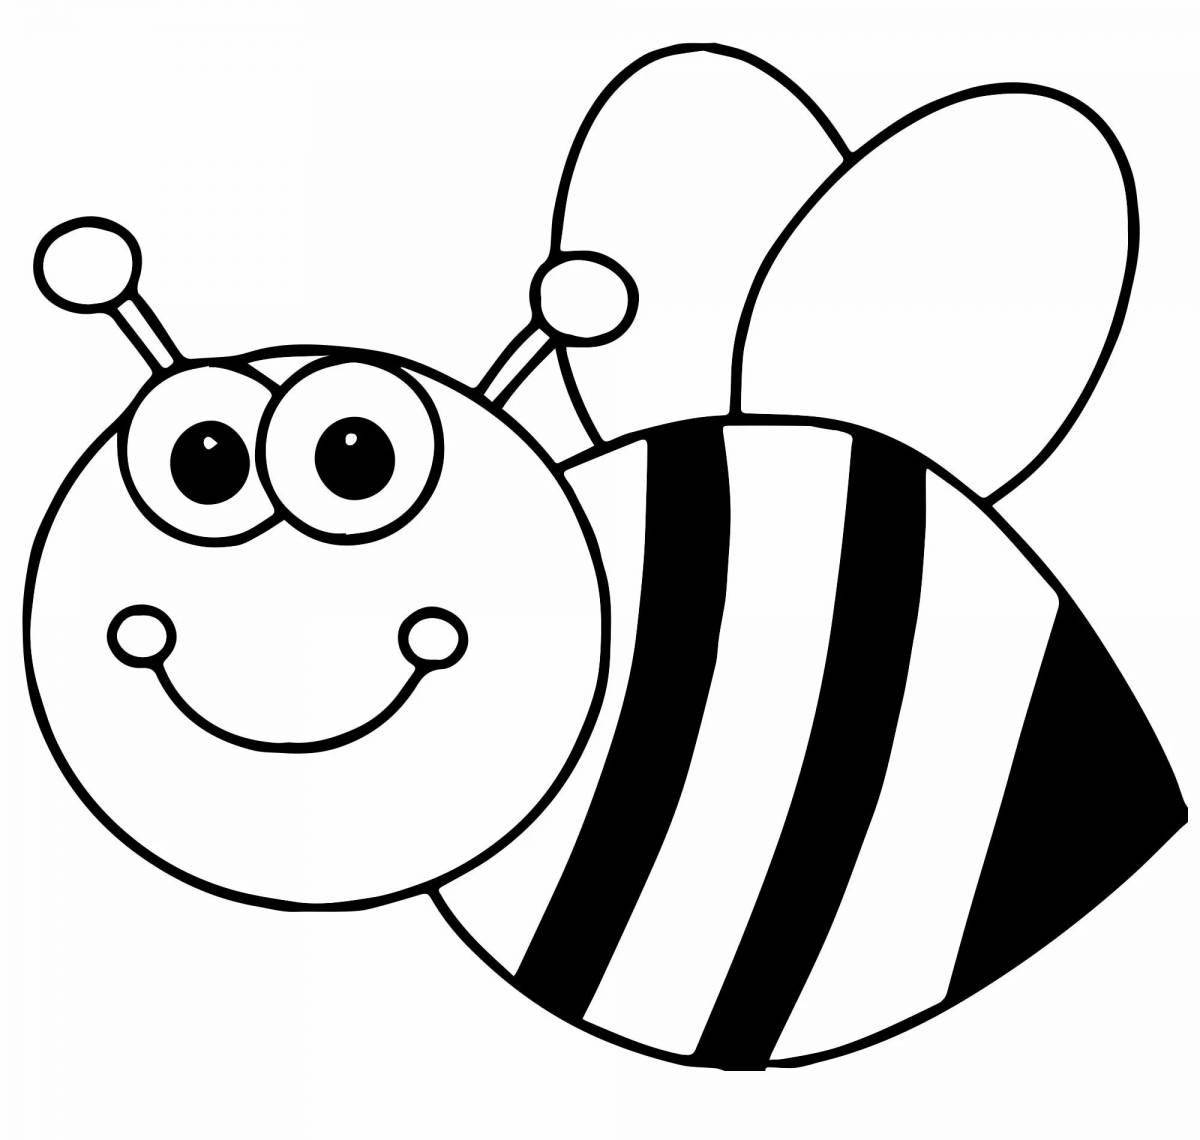 Bright bee coloring book for 3-4 year olds